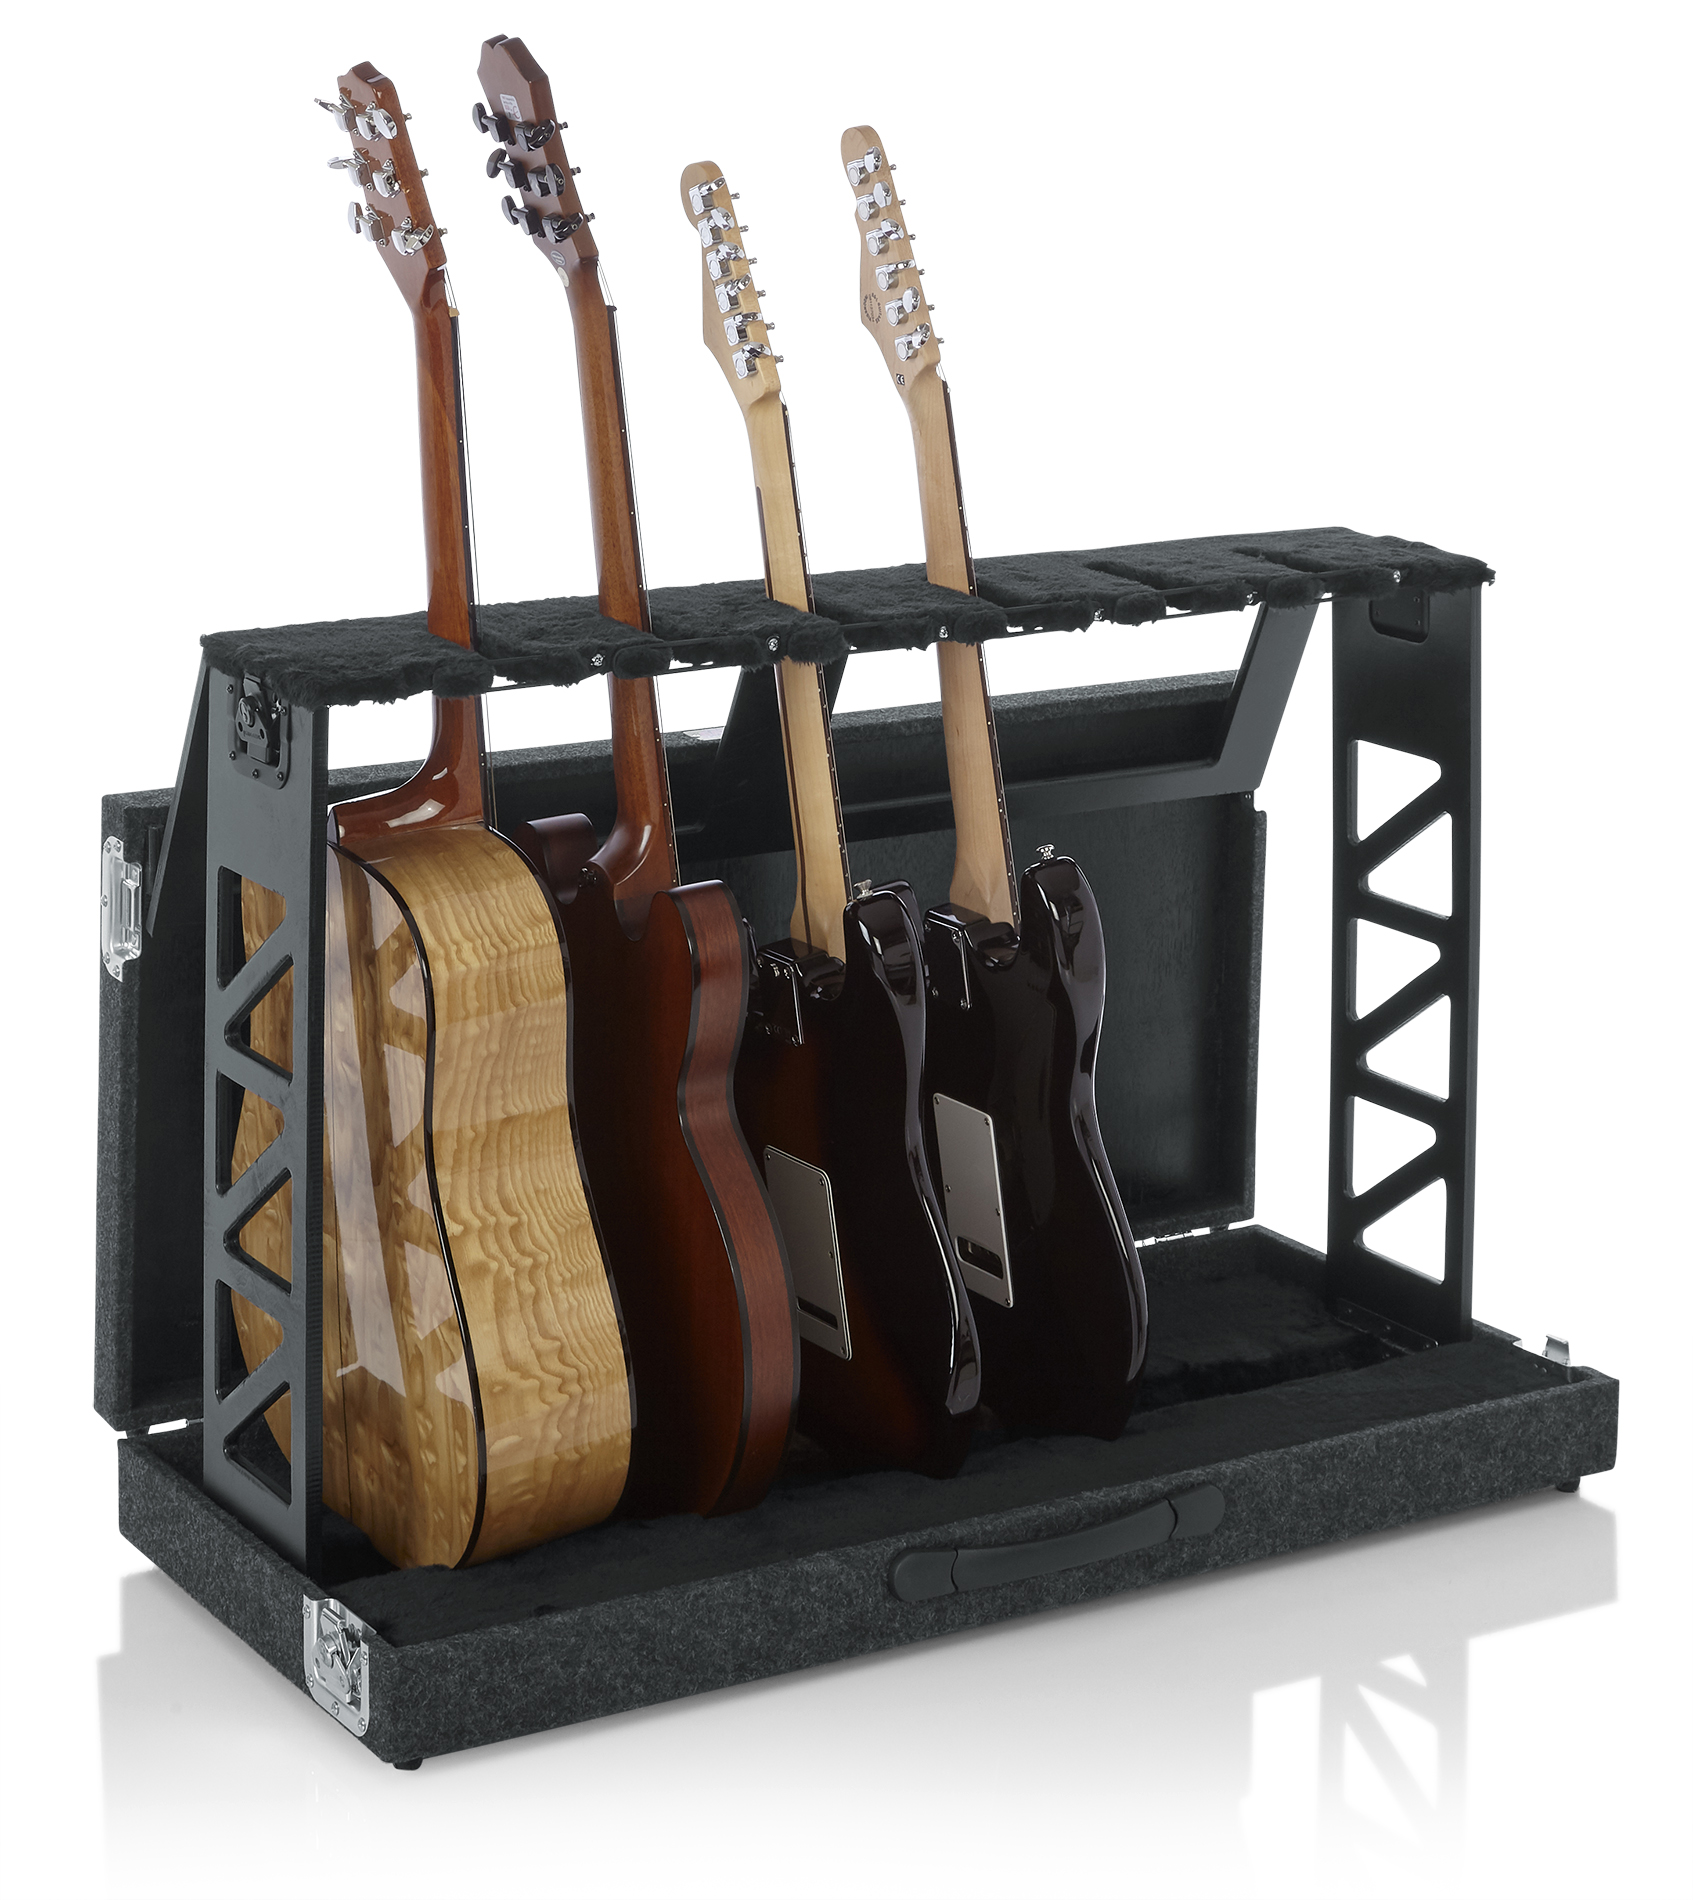 Rack Style 6 Guitar Stand that Folds into Case-GTRSTD6